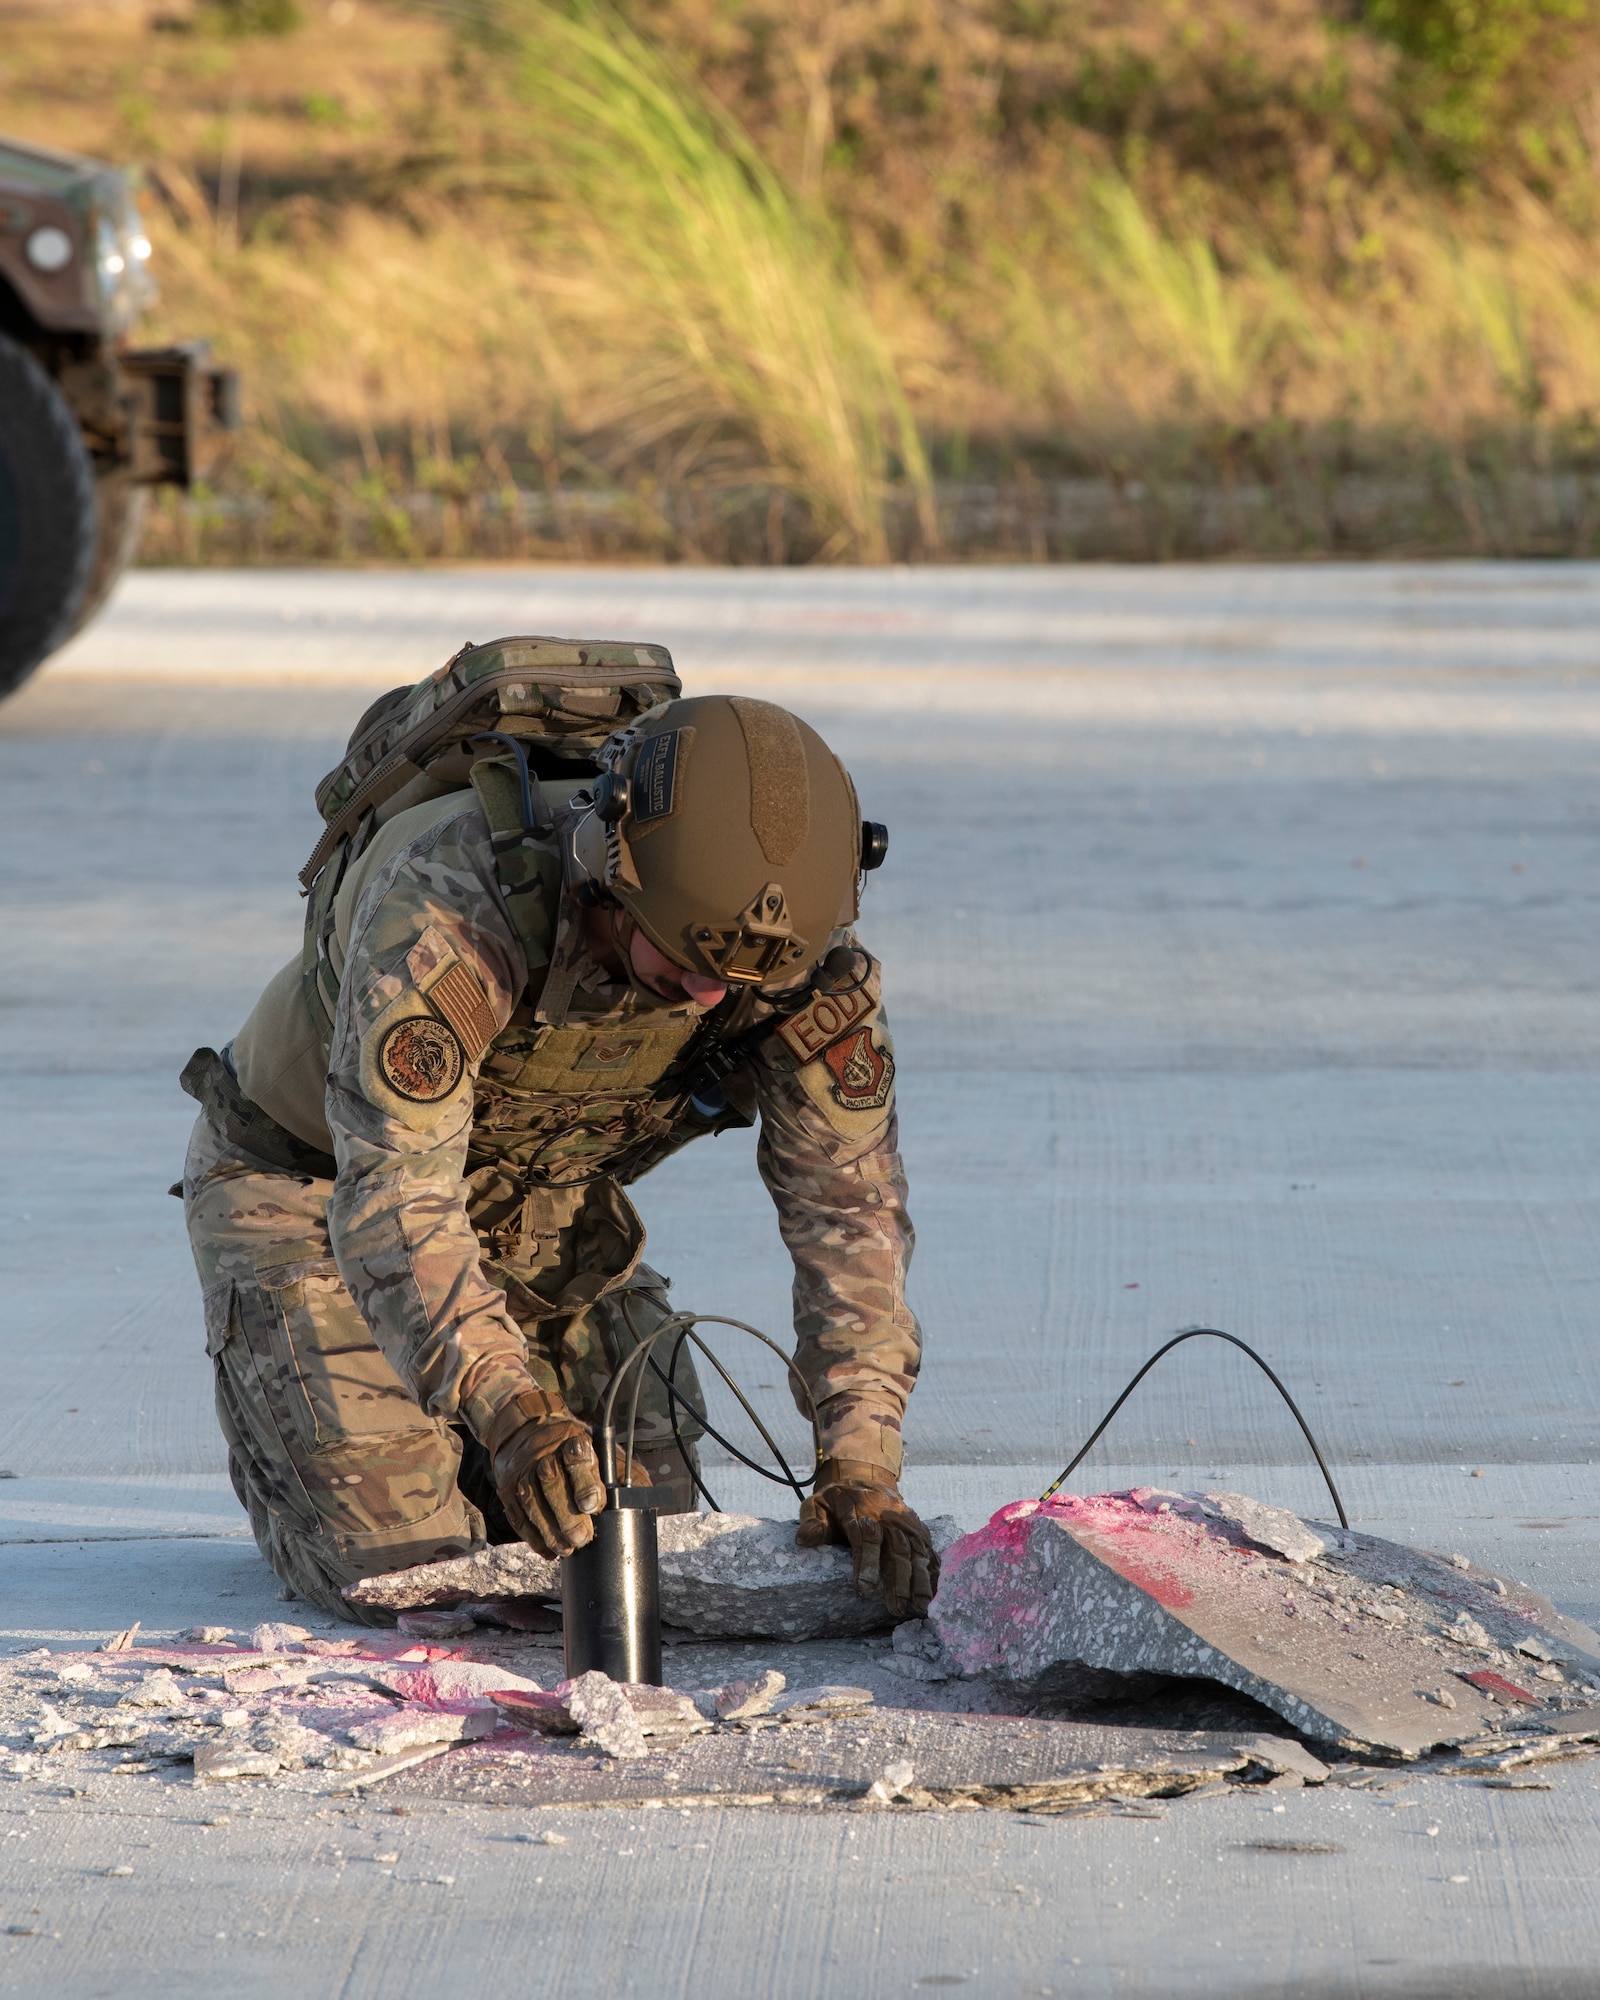 A U.S. Air Force Explosive Ordnance technician plants an explosive during a Rapid Airfield Damage Repair (RADR) Exercise at Andersen Air Force Base, Feb. 12, 2021.